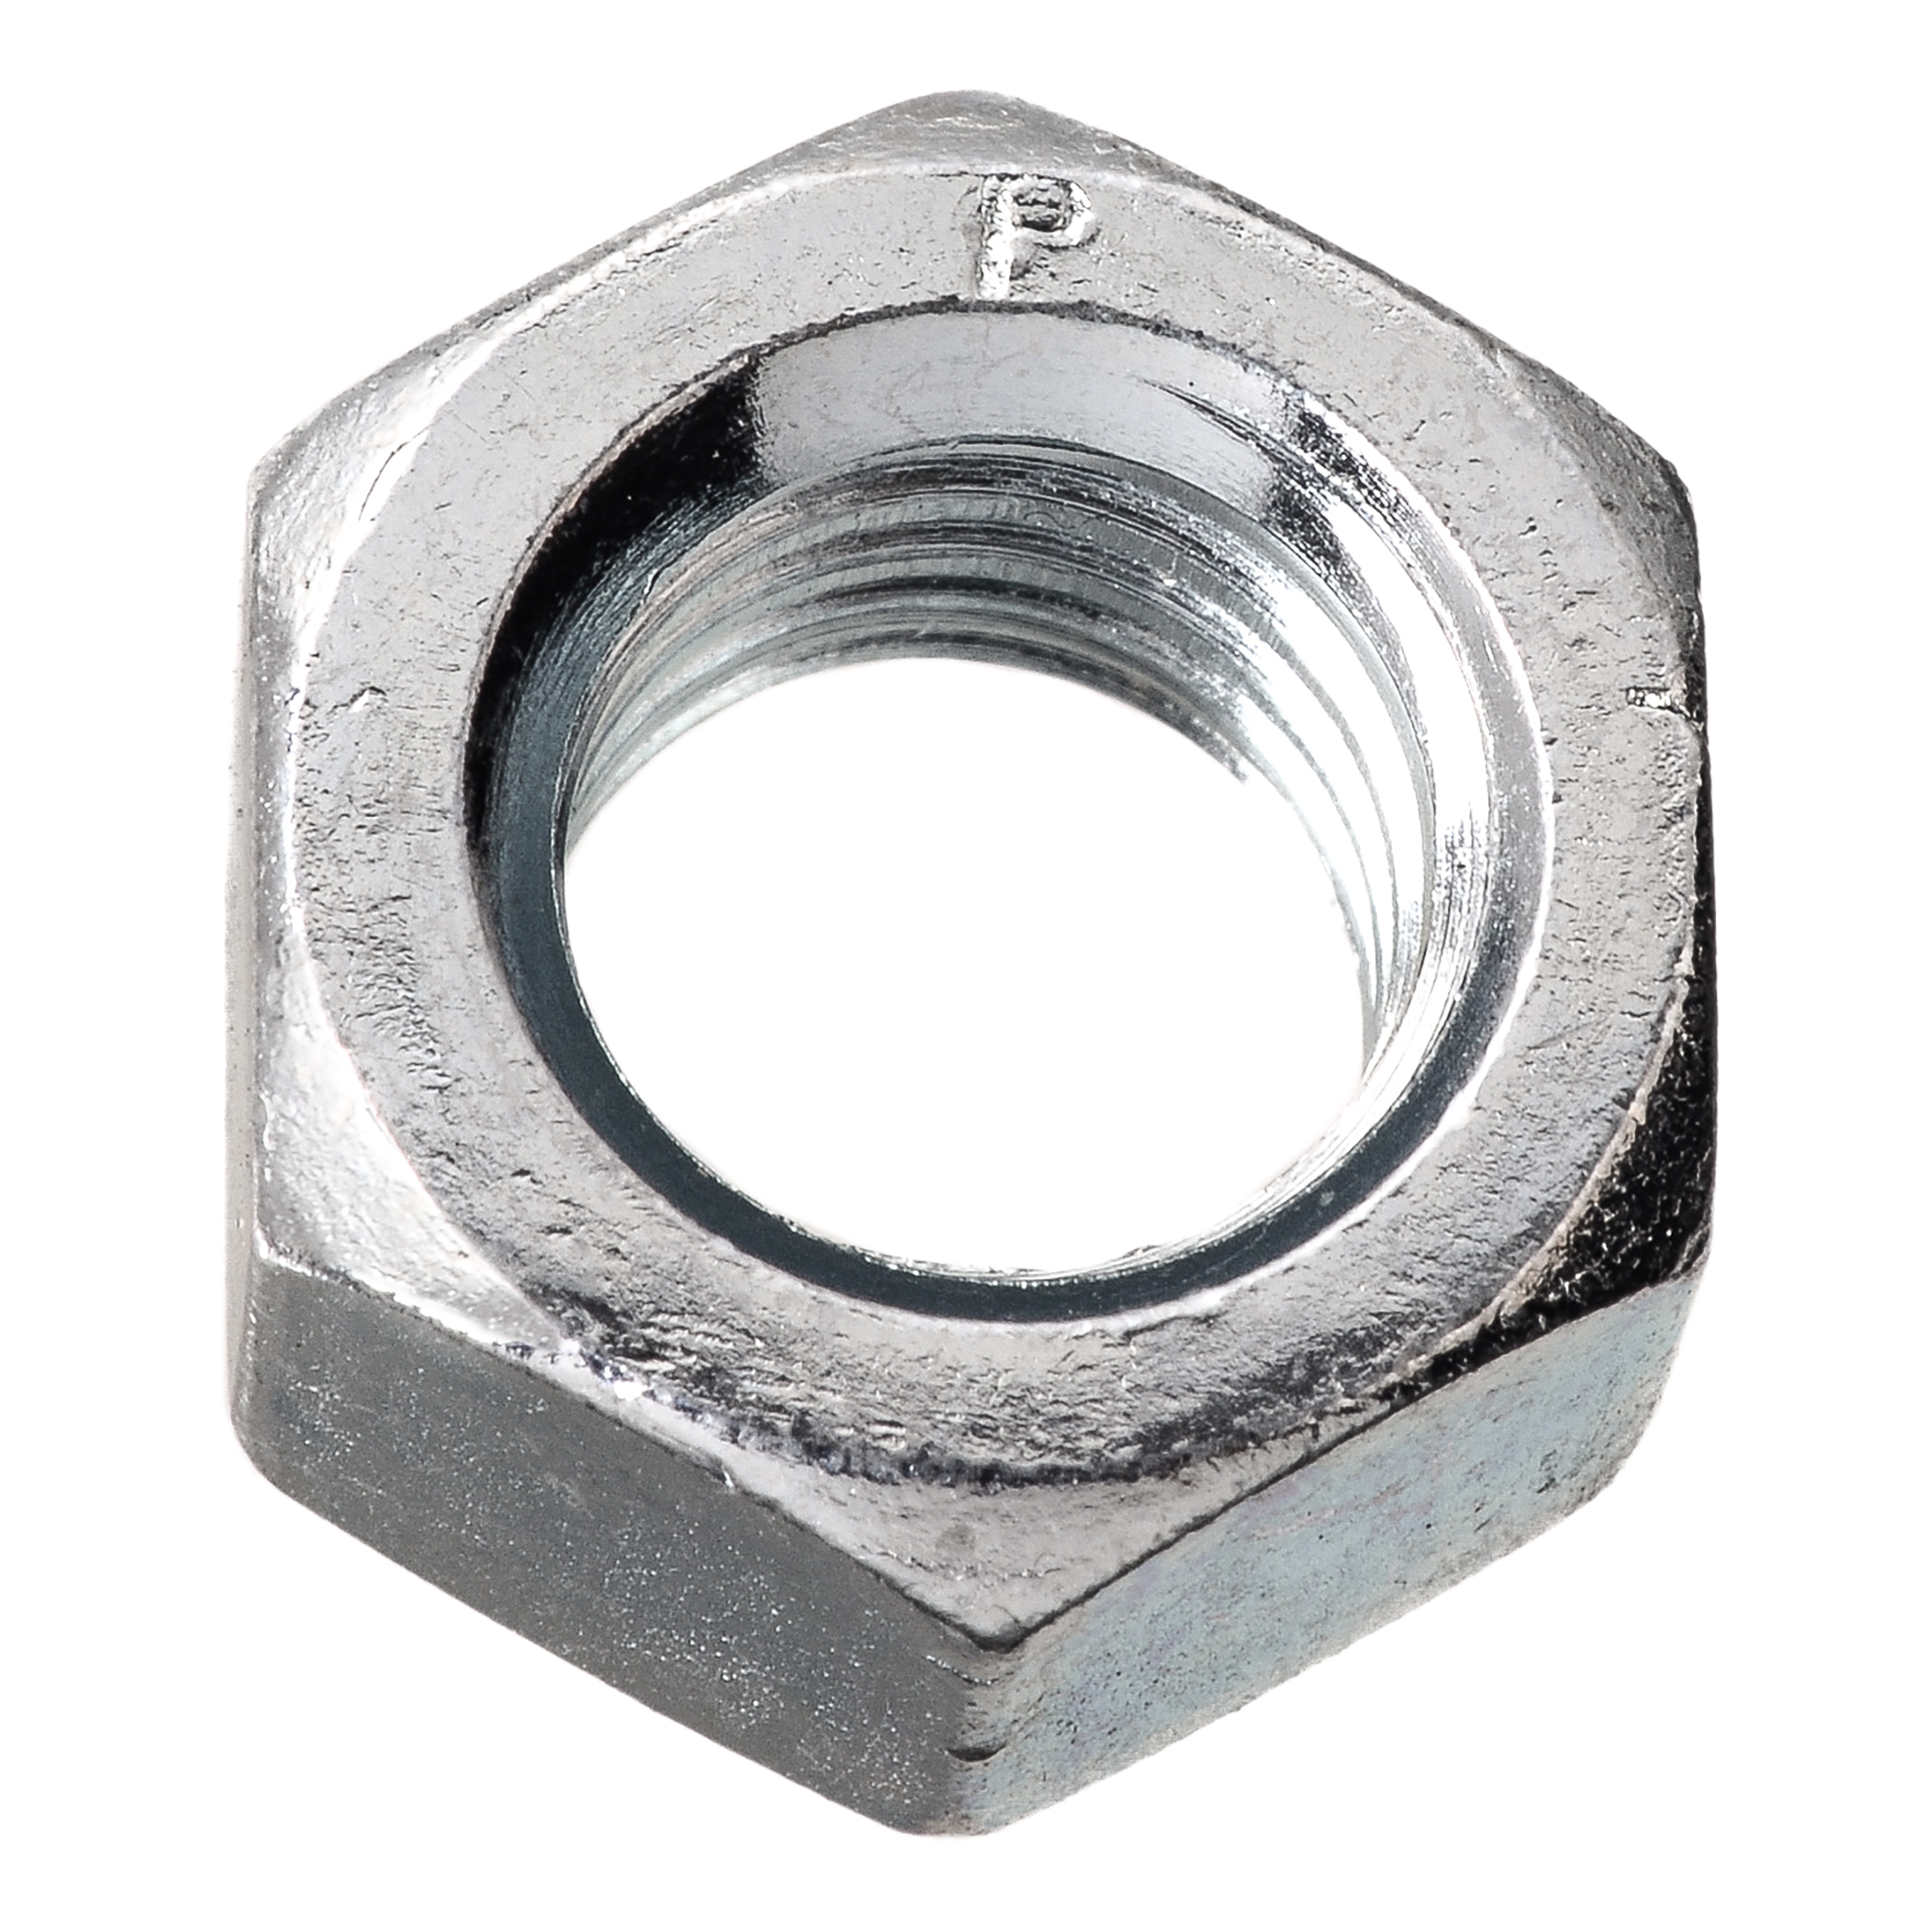 H Paulin 083 022 Papco® Finished Hex Nut 12 In 13 Grade 2 Zinc Plated 